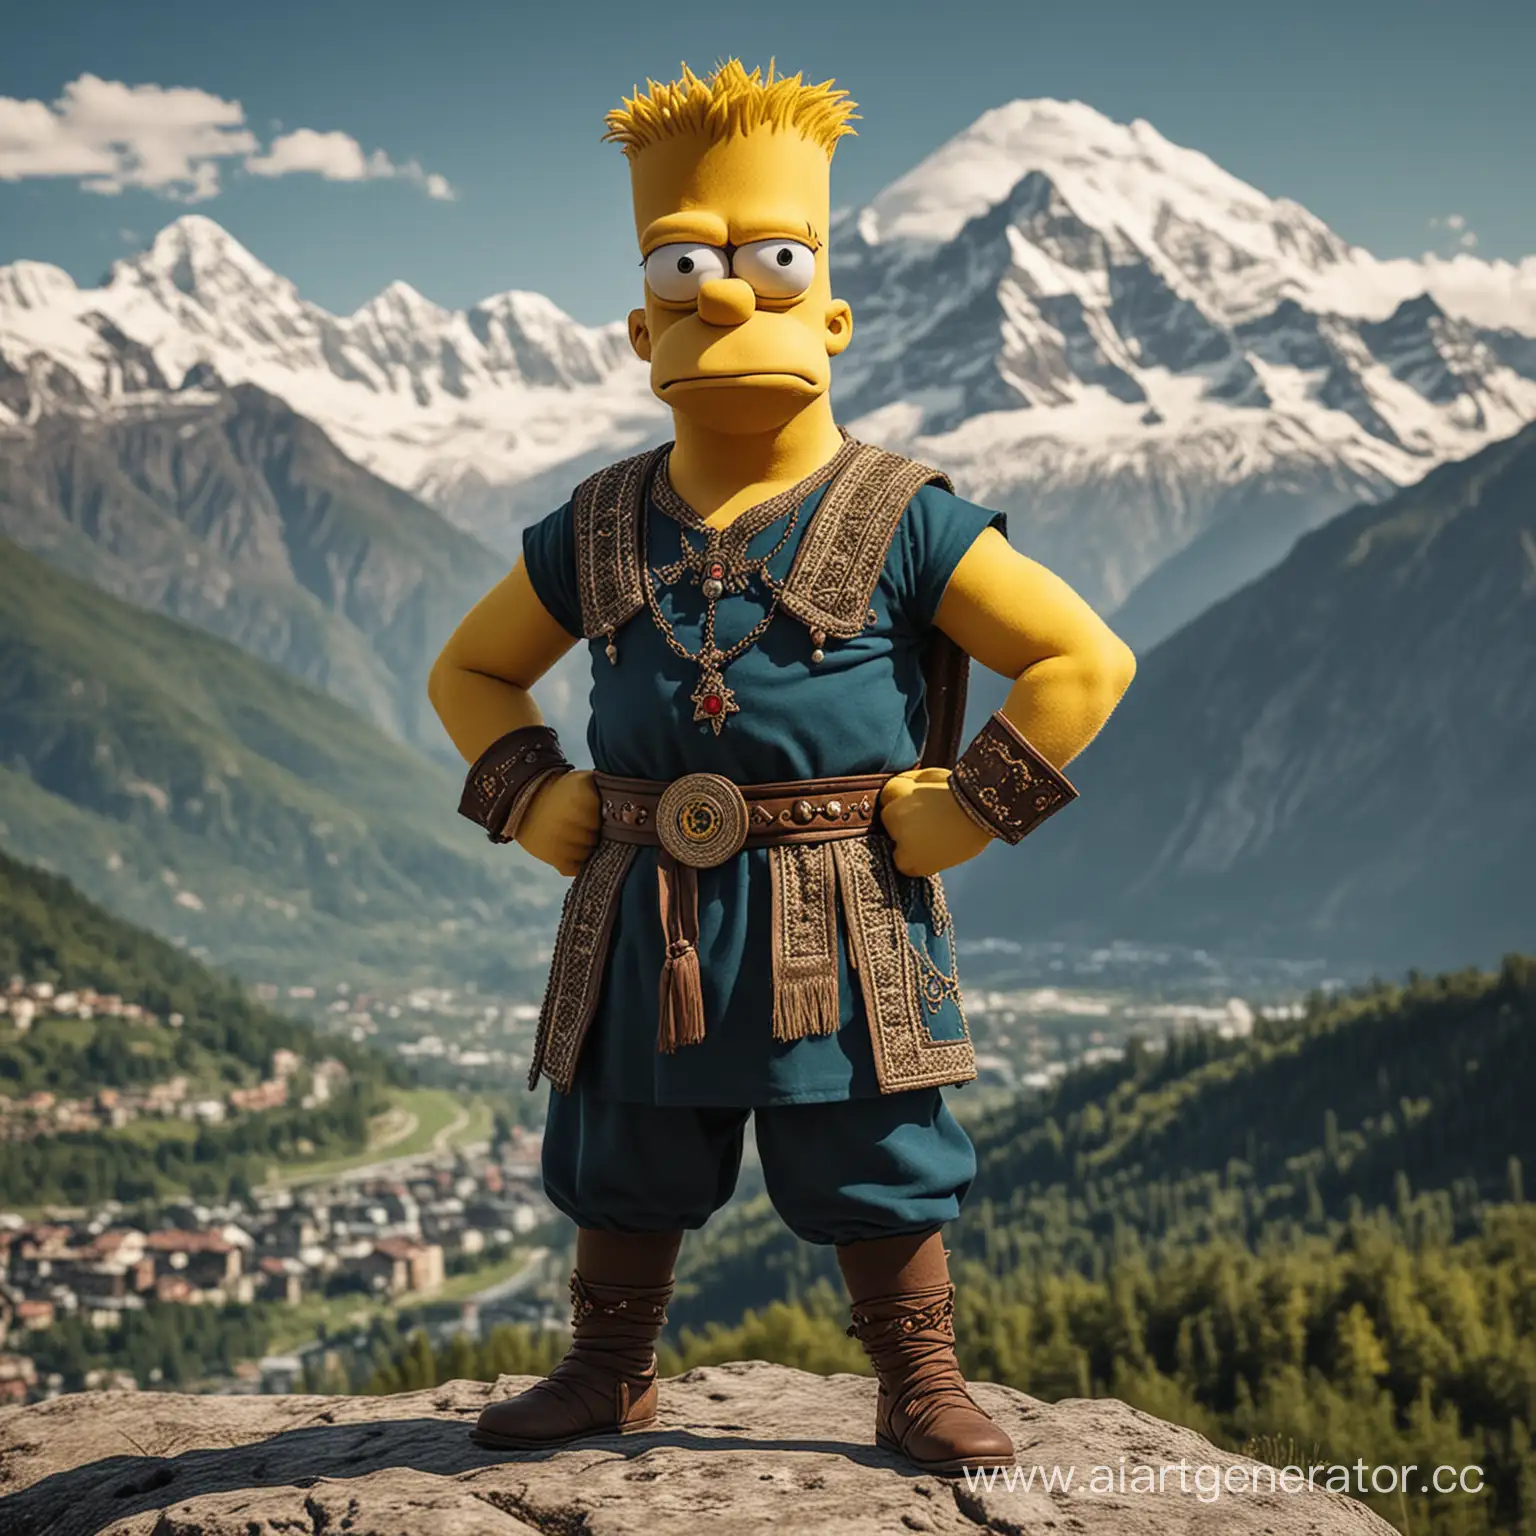 Muscular-Bart-Simpson-in-Traditional-Caucasian-Circassian-Attire-with-Mountain-Background